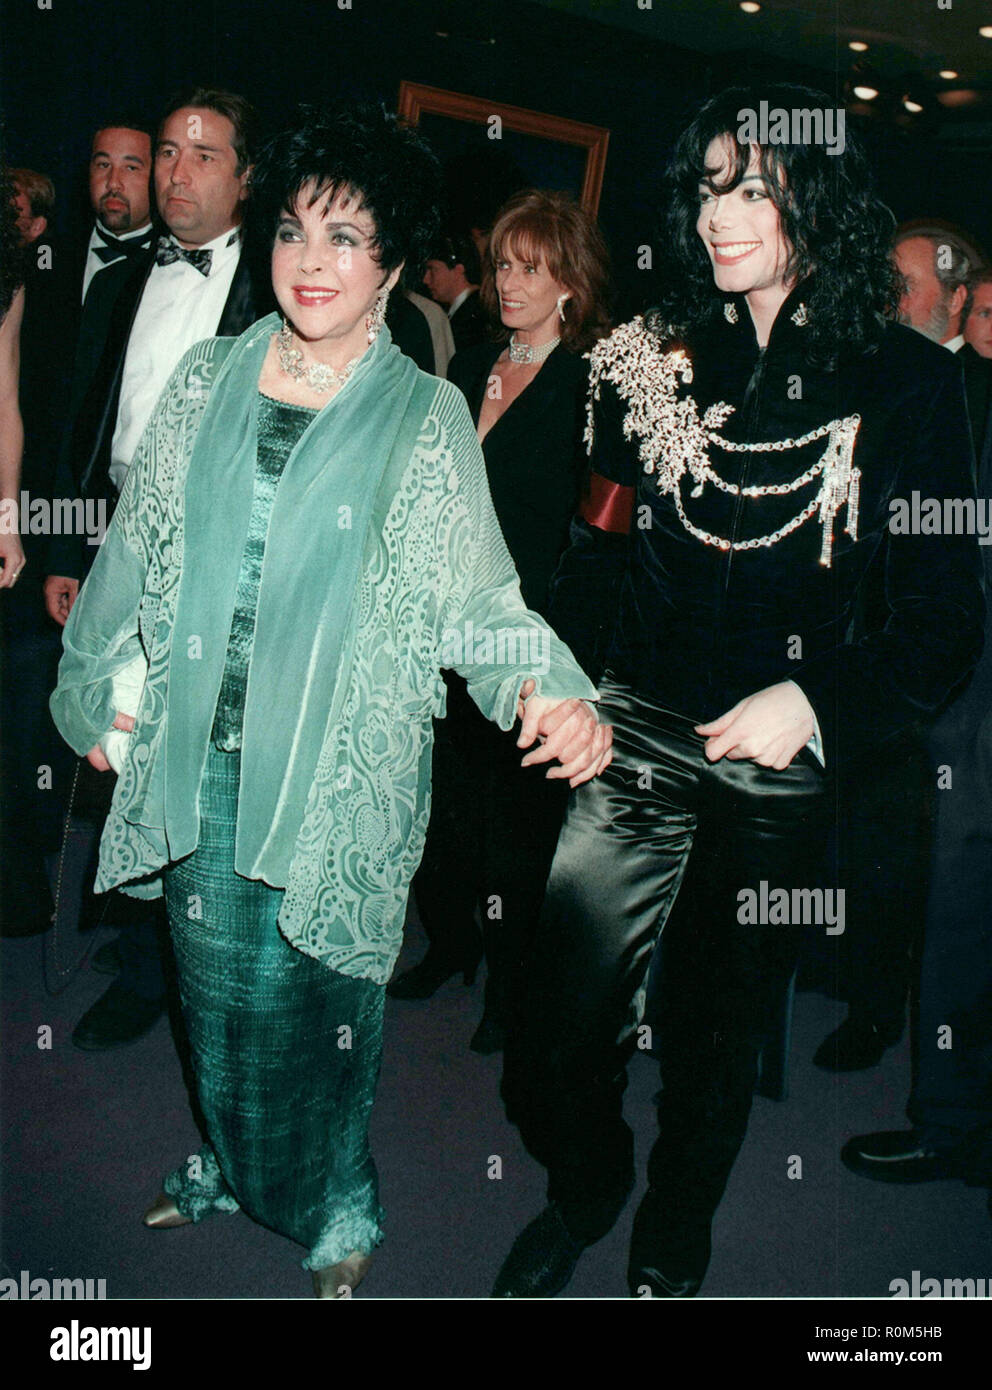 Elizabeth taylor and Michael jackson ÉÉ.. Event in Hollywood Life - California, USA, Film Industry, Celebrities, Photography, Bestof, Arts Culture and Entertainment, Topix Celebrities fashion, Best of, Hollywood Life,  Red Carpet and backstage, movie celebrities, TV celebrities, Music celebrities, Topix, Bestof, Arts Culture and Entertainment, vertical, one person, Photography,   #Celebrity #Hollywood #RedCarpet #Actor #Actress #famousCelebrity #HollywoodEvent #TsuniUSA #CelebrityPhotography, Fashion inquiry tsuni@Gamma-USA.com , Credit Tsuni / USA,   Fashion, From the Year 1993 to 1999, Stock Photo